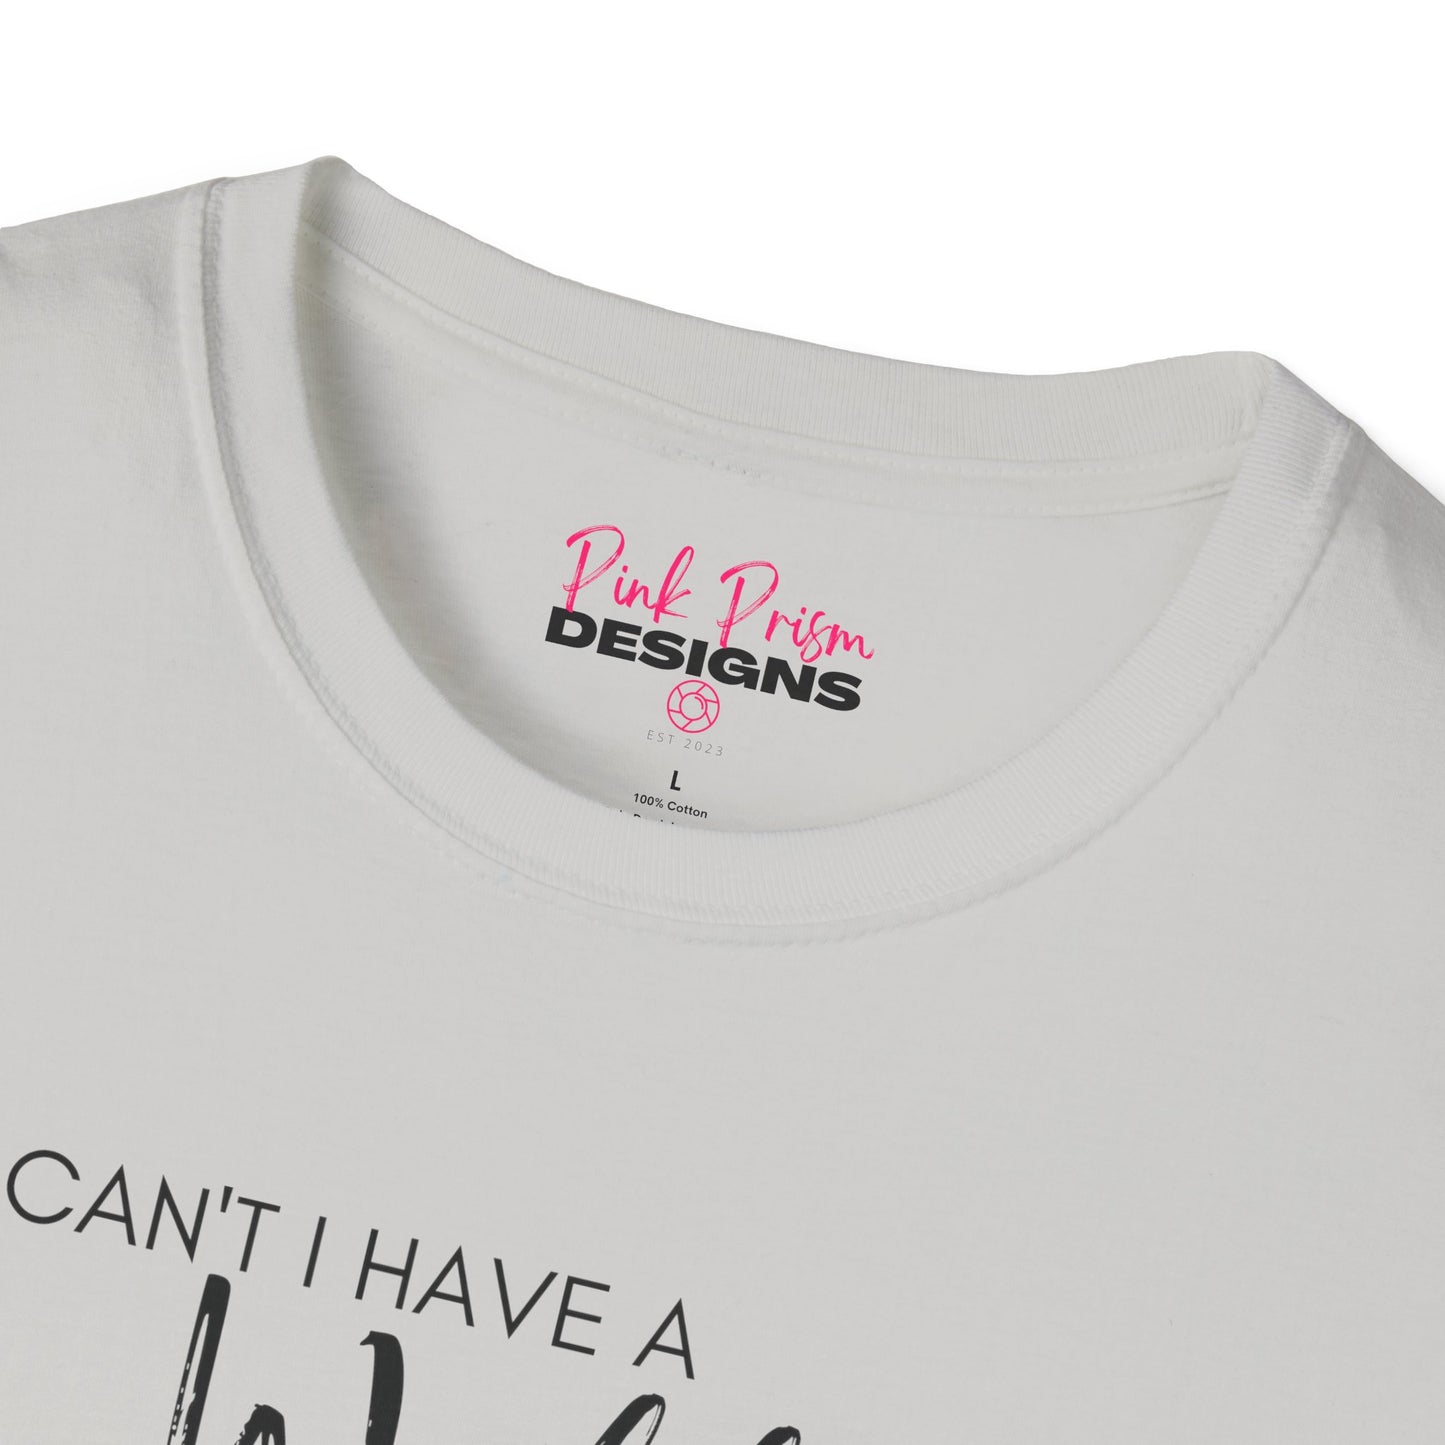 I can't I Have a Wedding - Softstyle T-Shirt